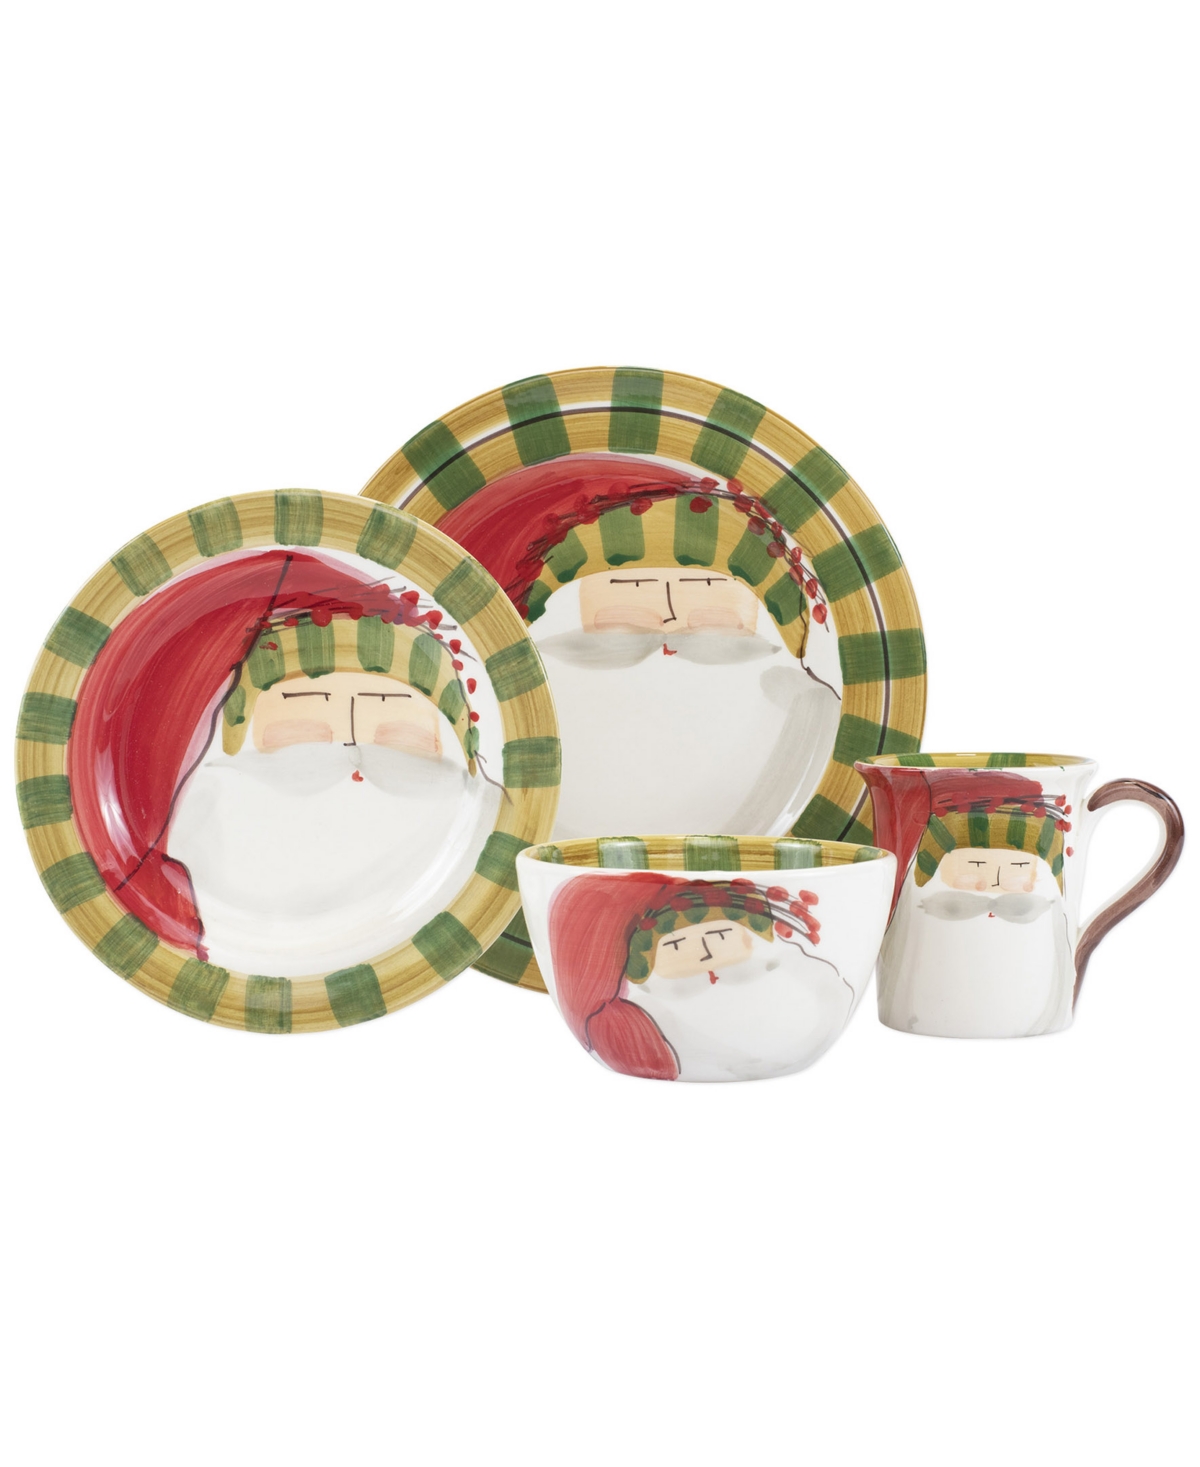 Old St. Nick Striped Hat 4 Piece Place Setting - Striped